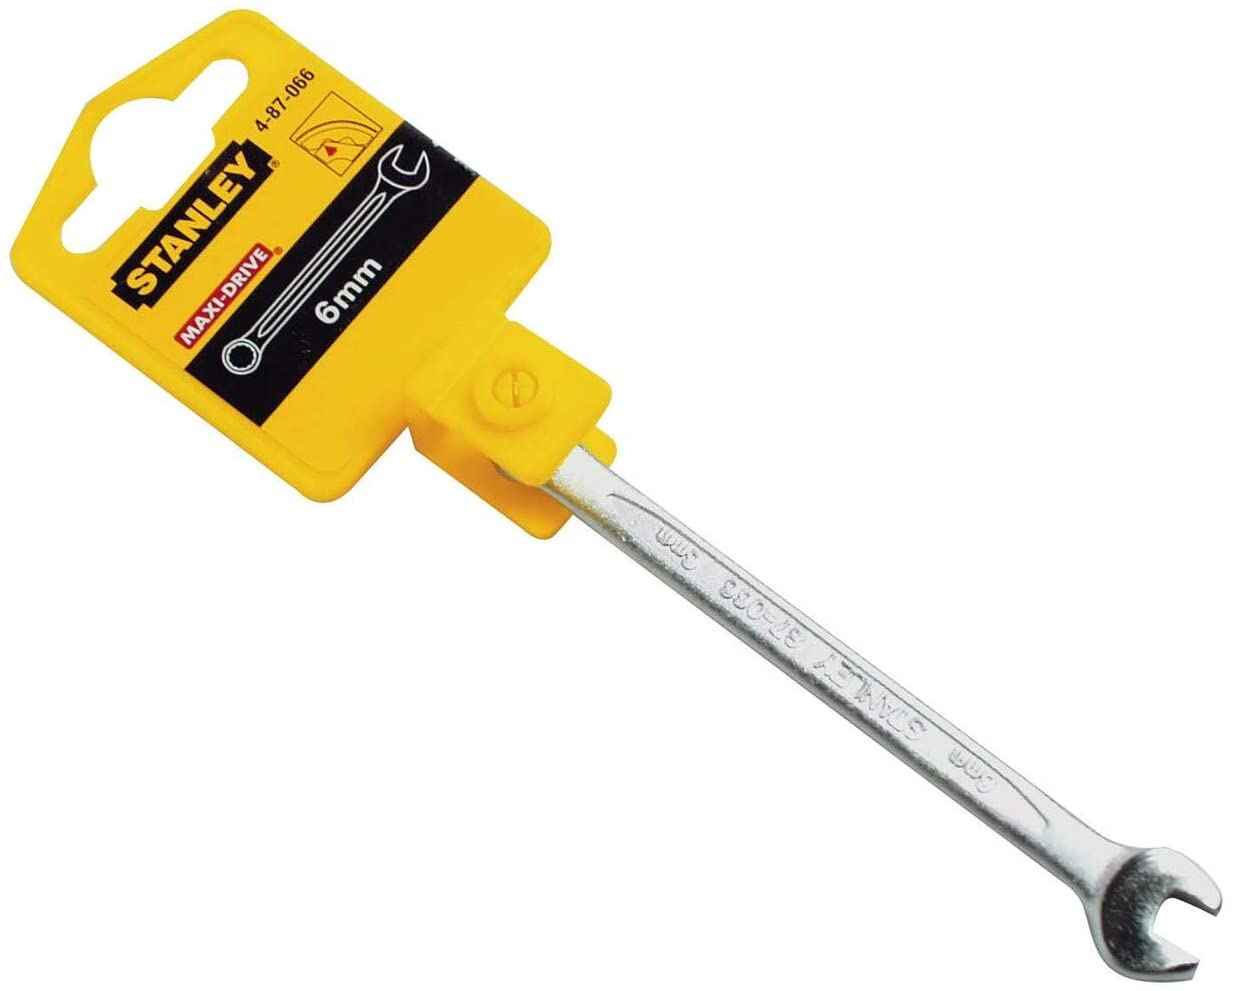 Stanley 24mm Combination Wrench - STMT72821-8 | Supply Master, Accra, Ghana Wrenches Buy Tools hardware Building materials